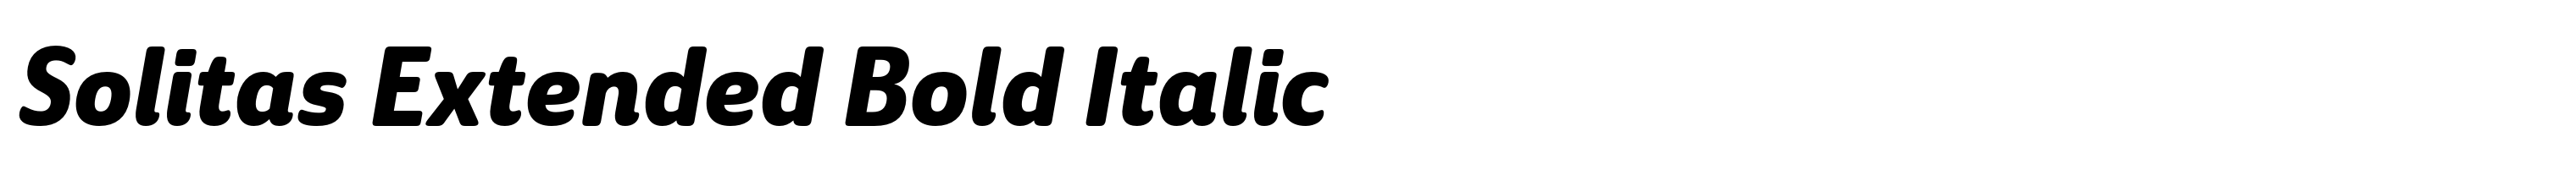 Solitas Extended Bold Italic